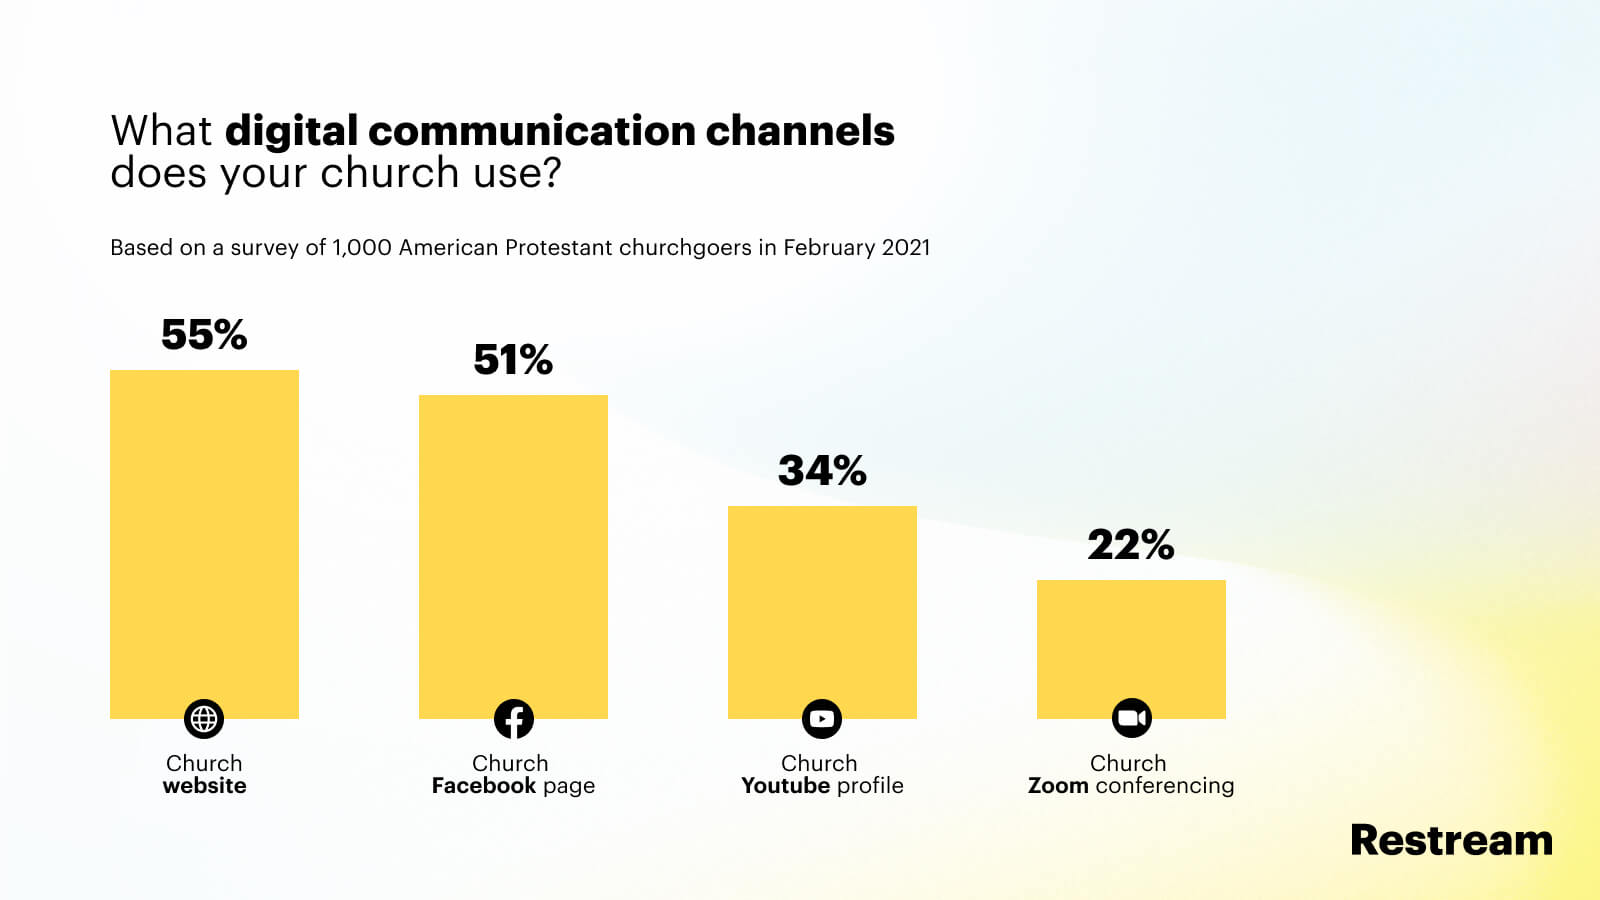 What digital communication channels does your church use?